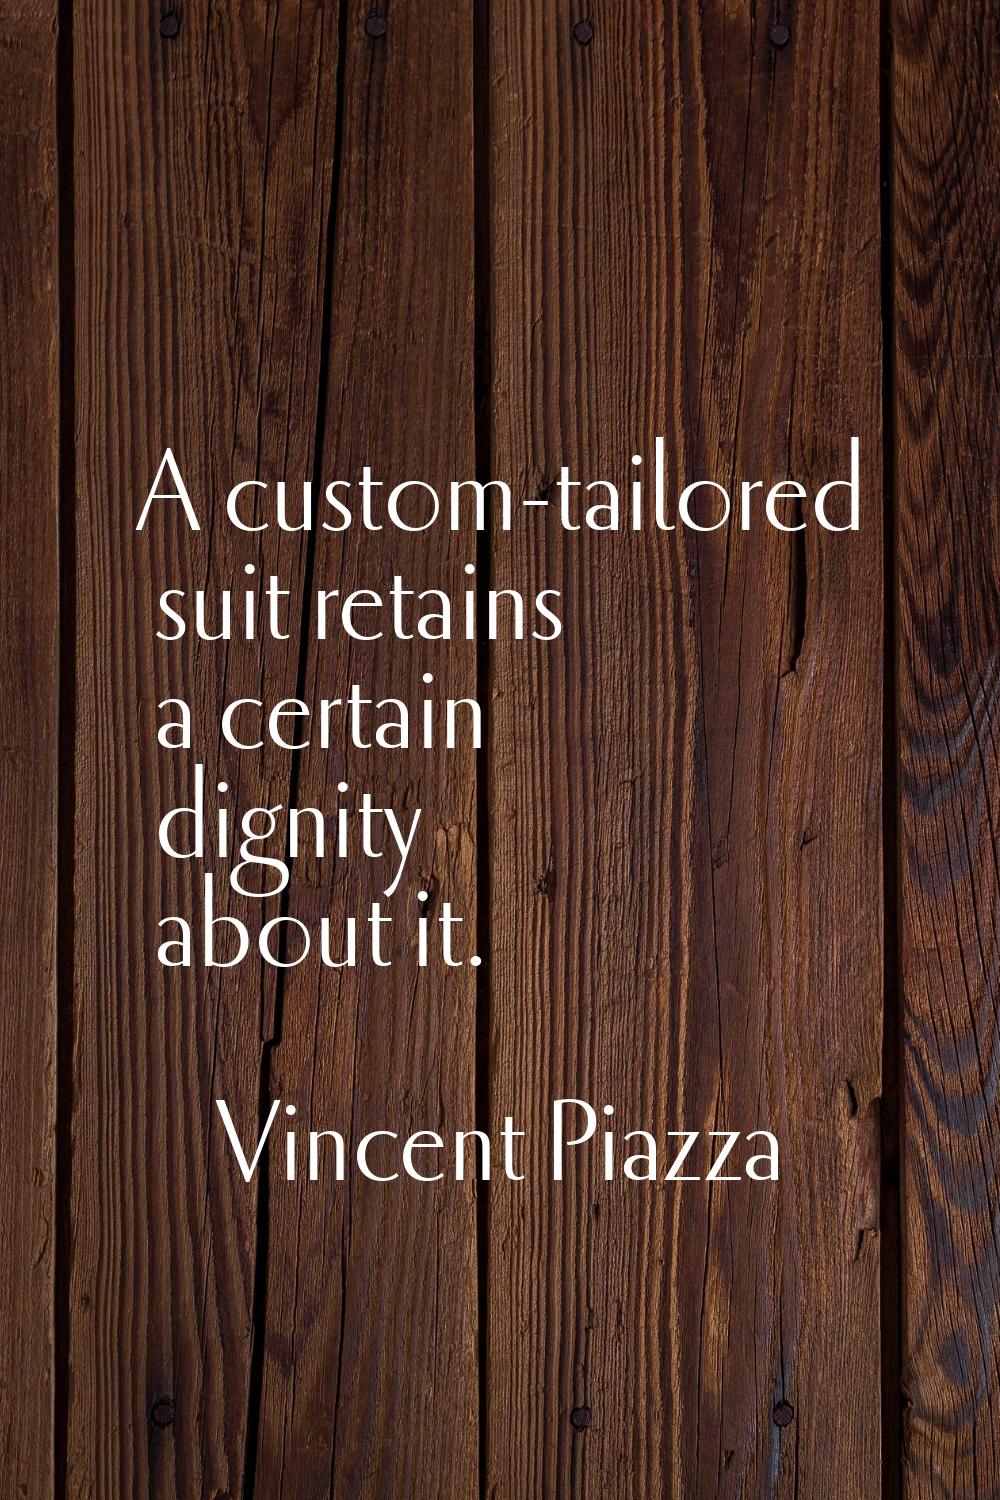 A custom-tailored suit retains a certain dignity about it.